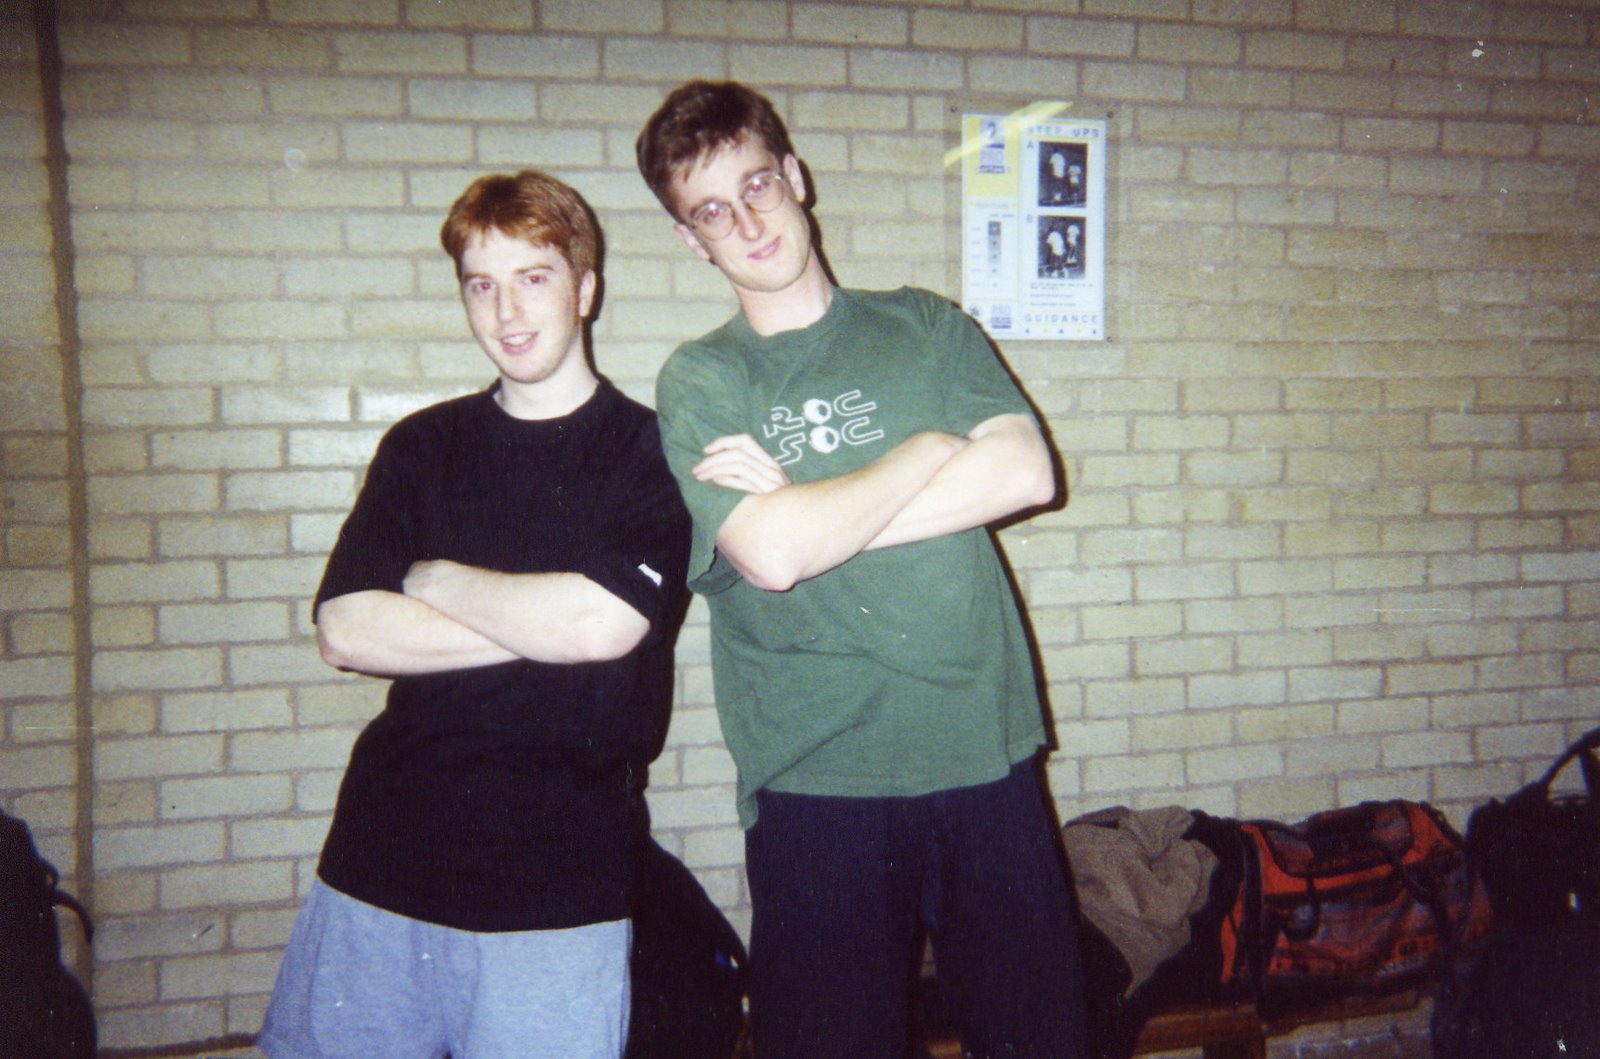 [James+and+Andy+from+ZSK,+looking+really+young+in+the+activities+room.+Think+this+was+1999.jpg]